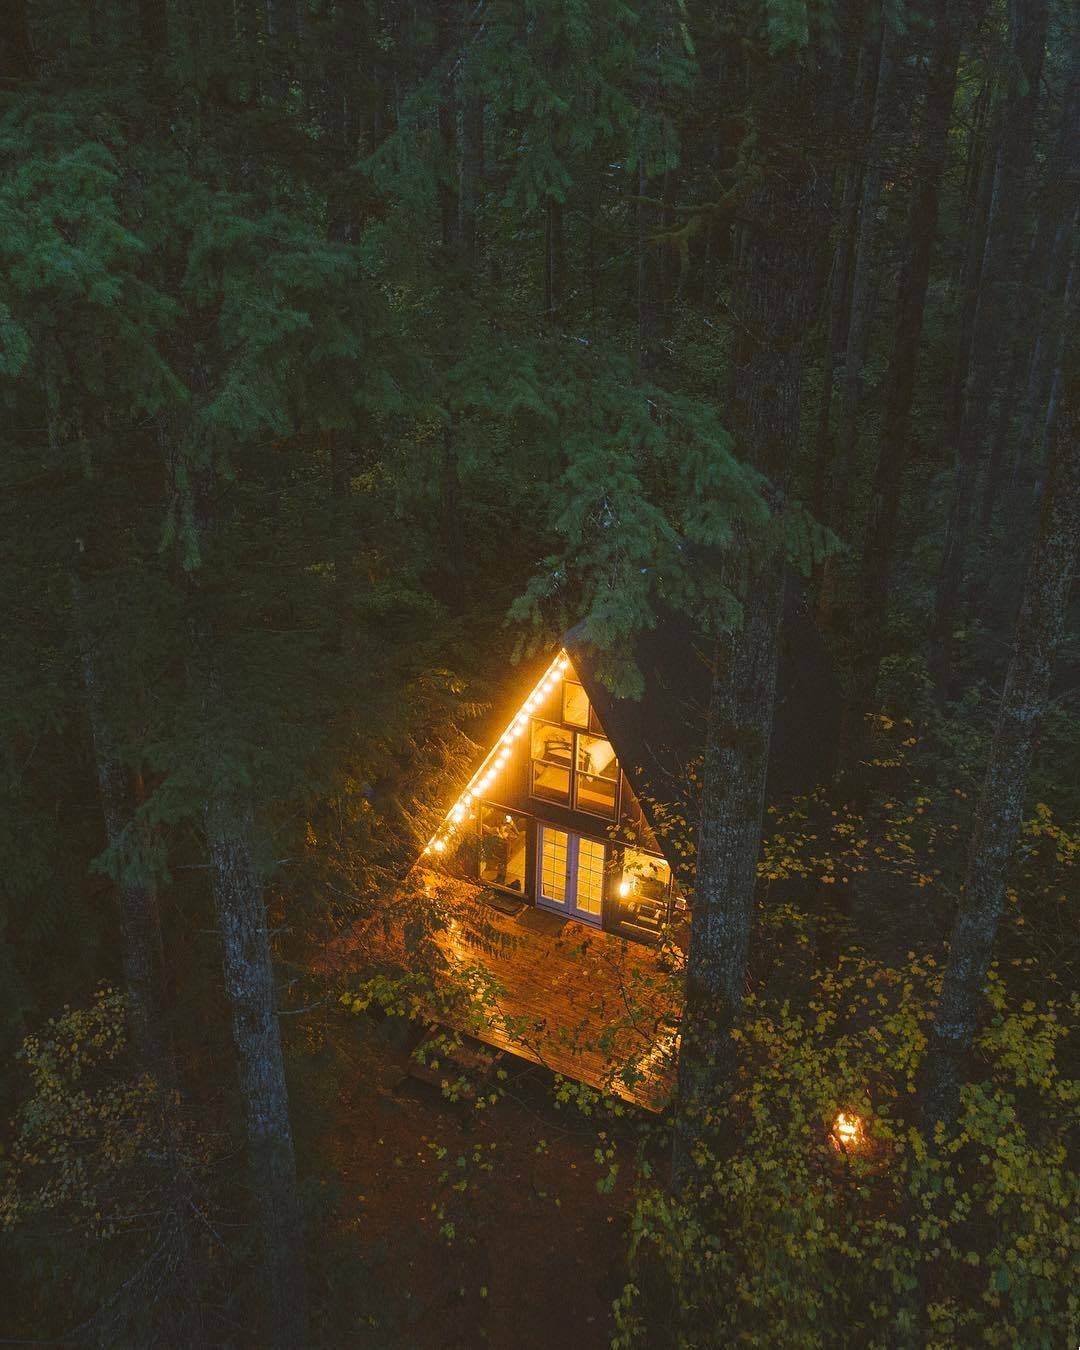 A-frame lit up in the woods of Washington State